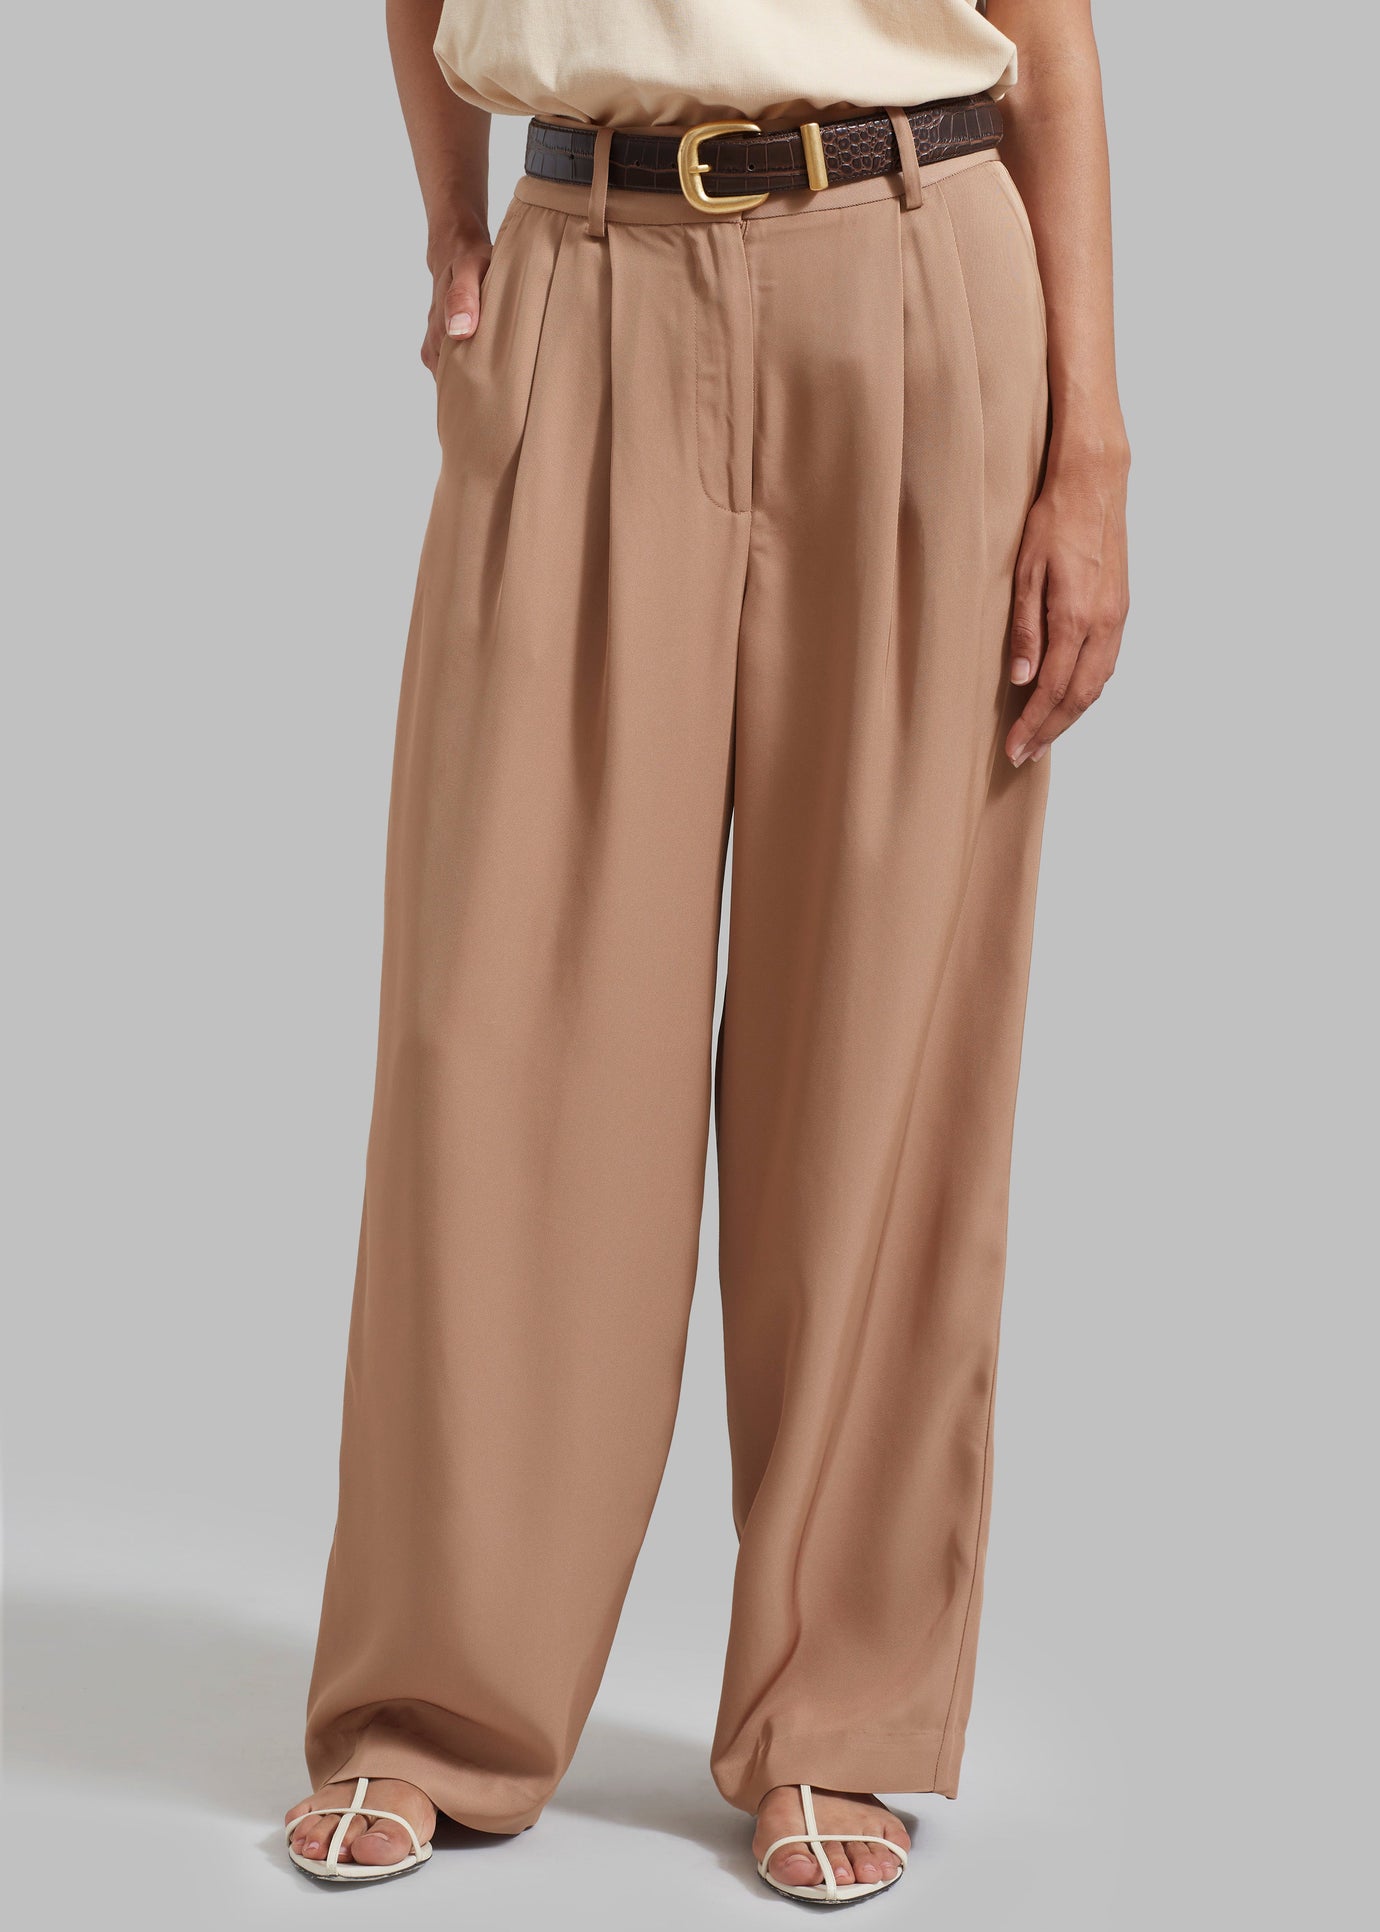 By Malene Birger Piscali Mid-Rise Pants - Tobacco Brown - 1